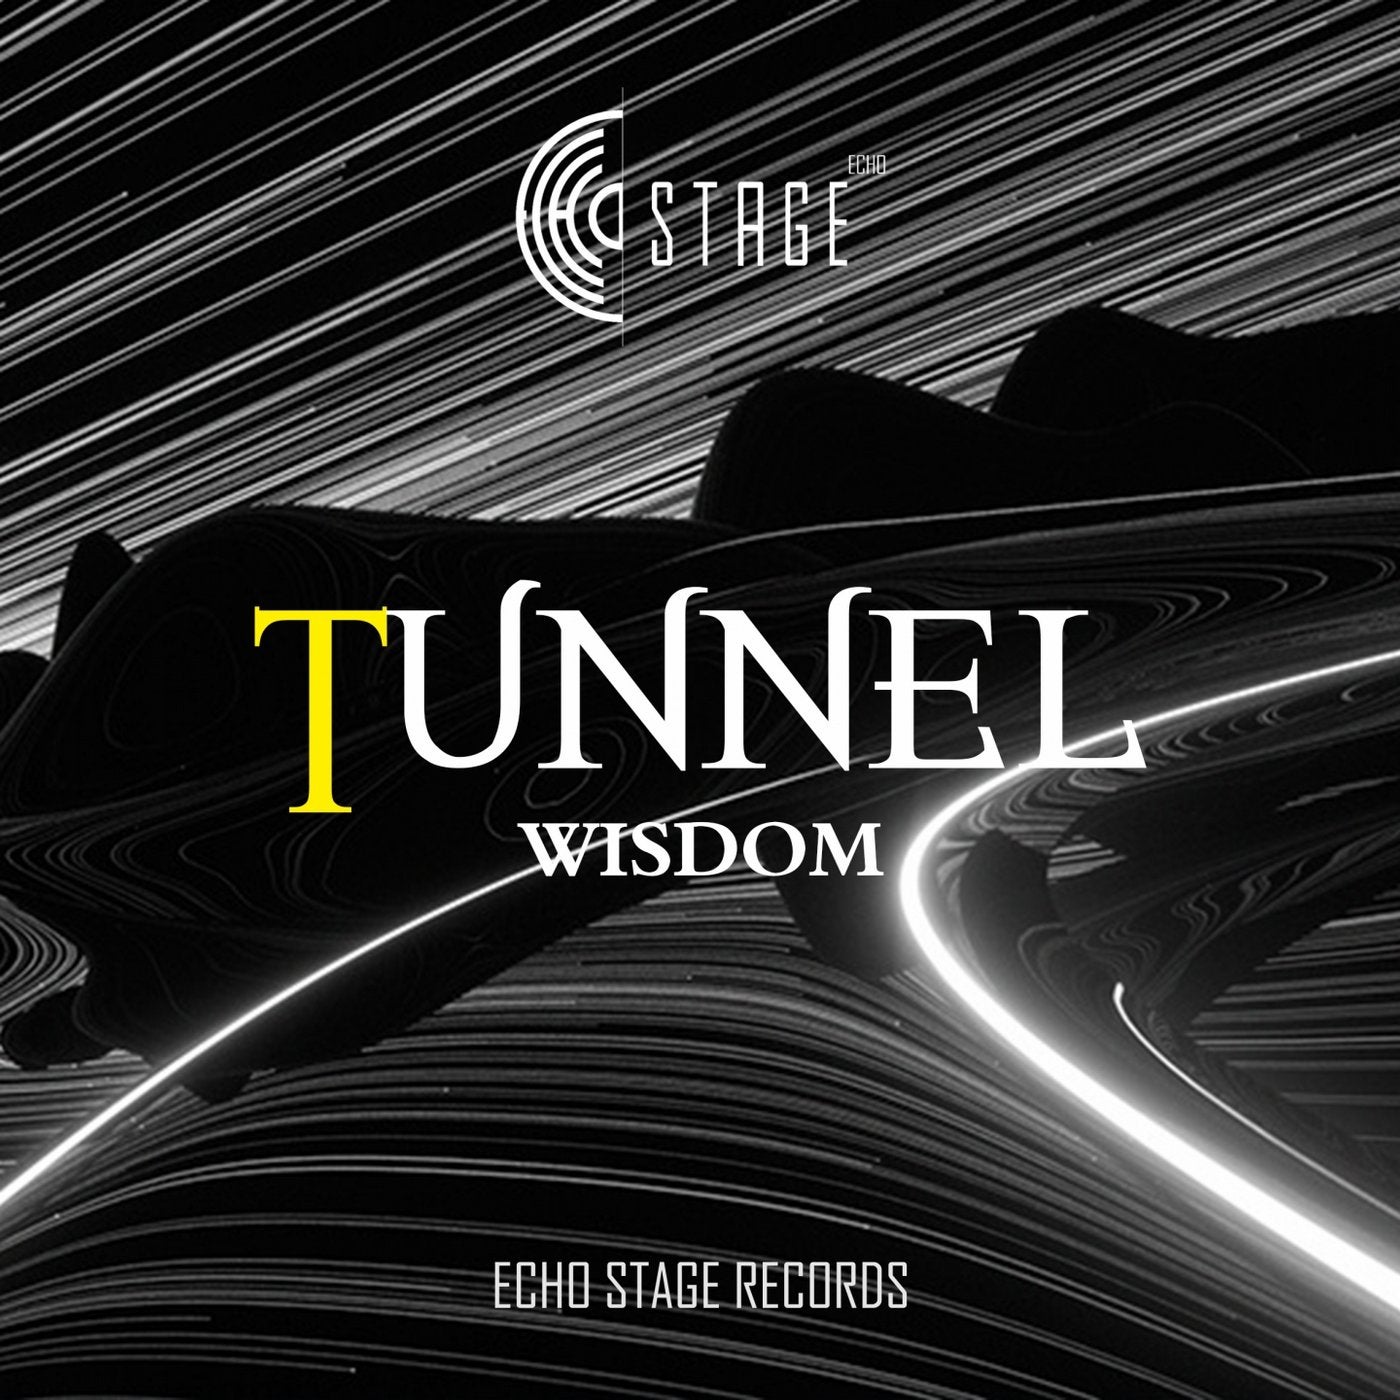 Tunnel (feat. Echo Stage Records) [Original Mix]